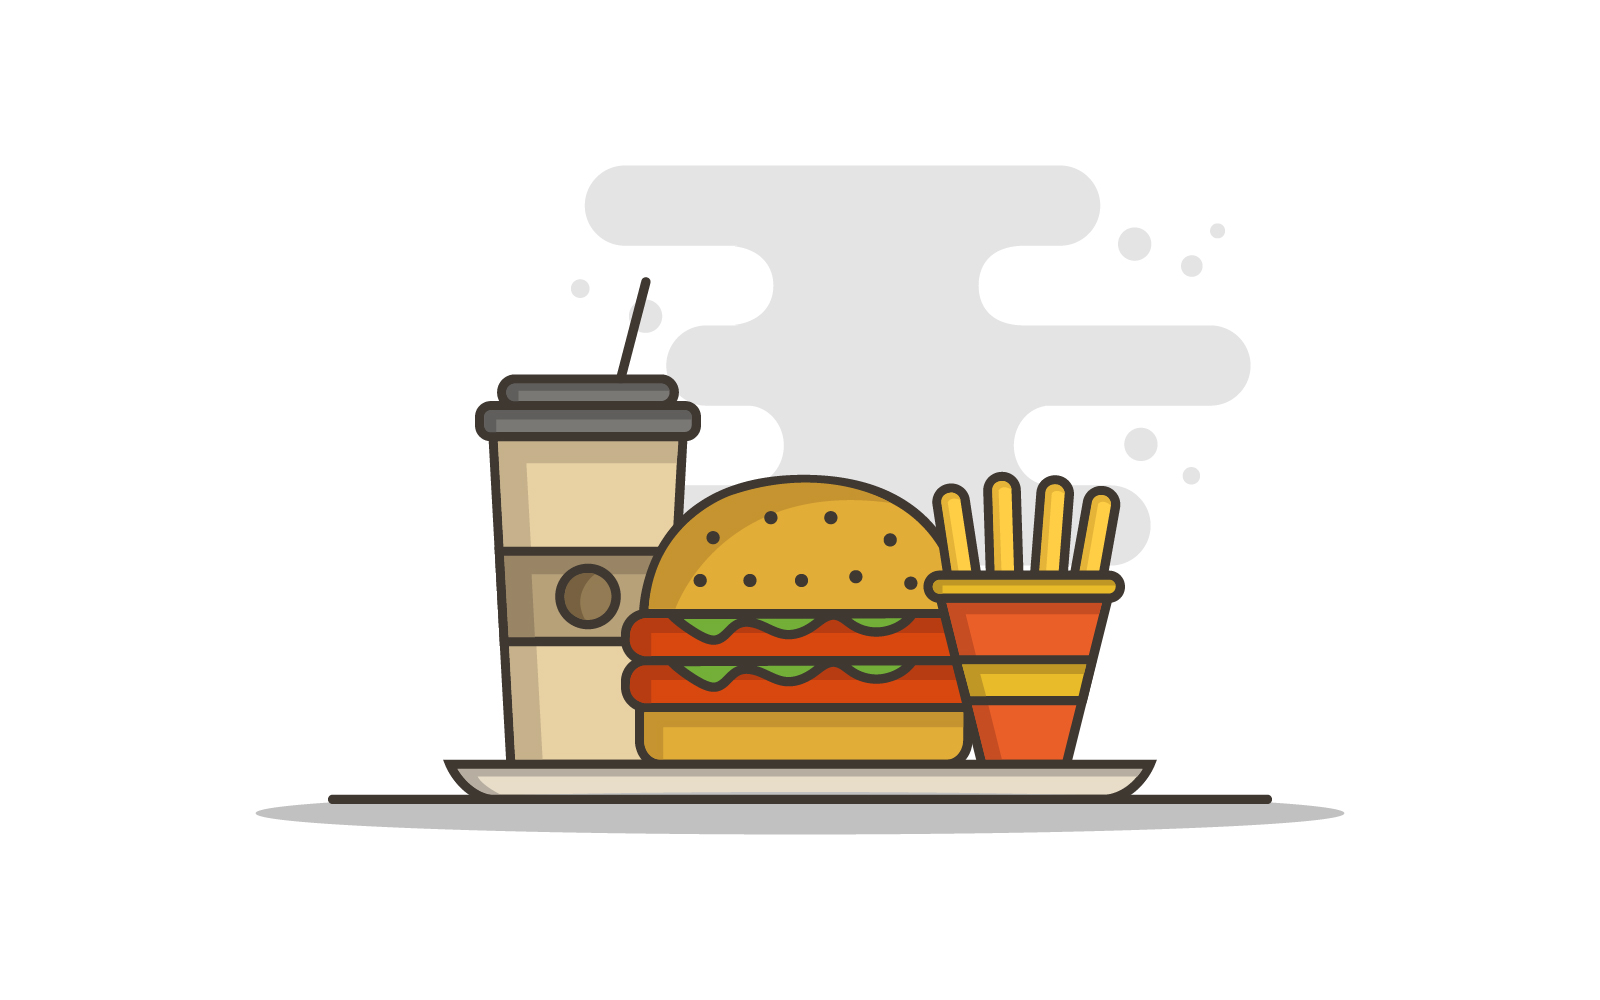 Chips and sandwich illustrated in vector on a white background